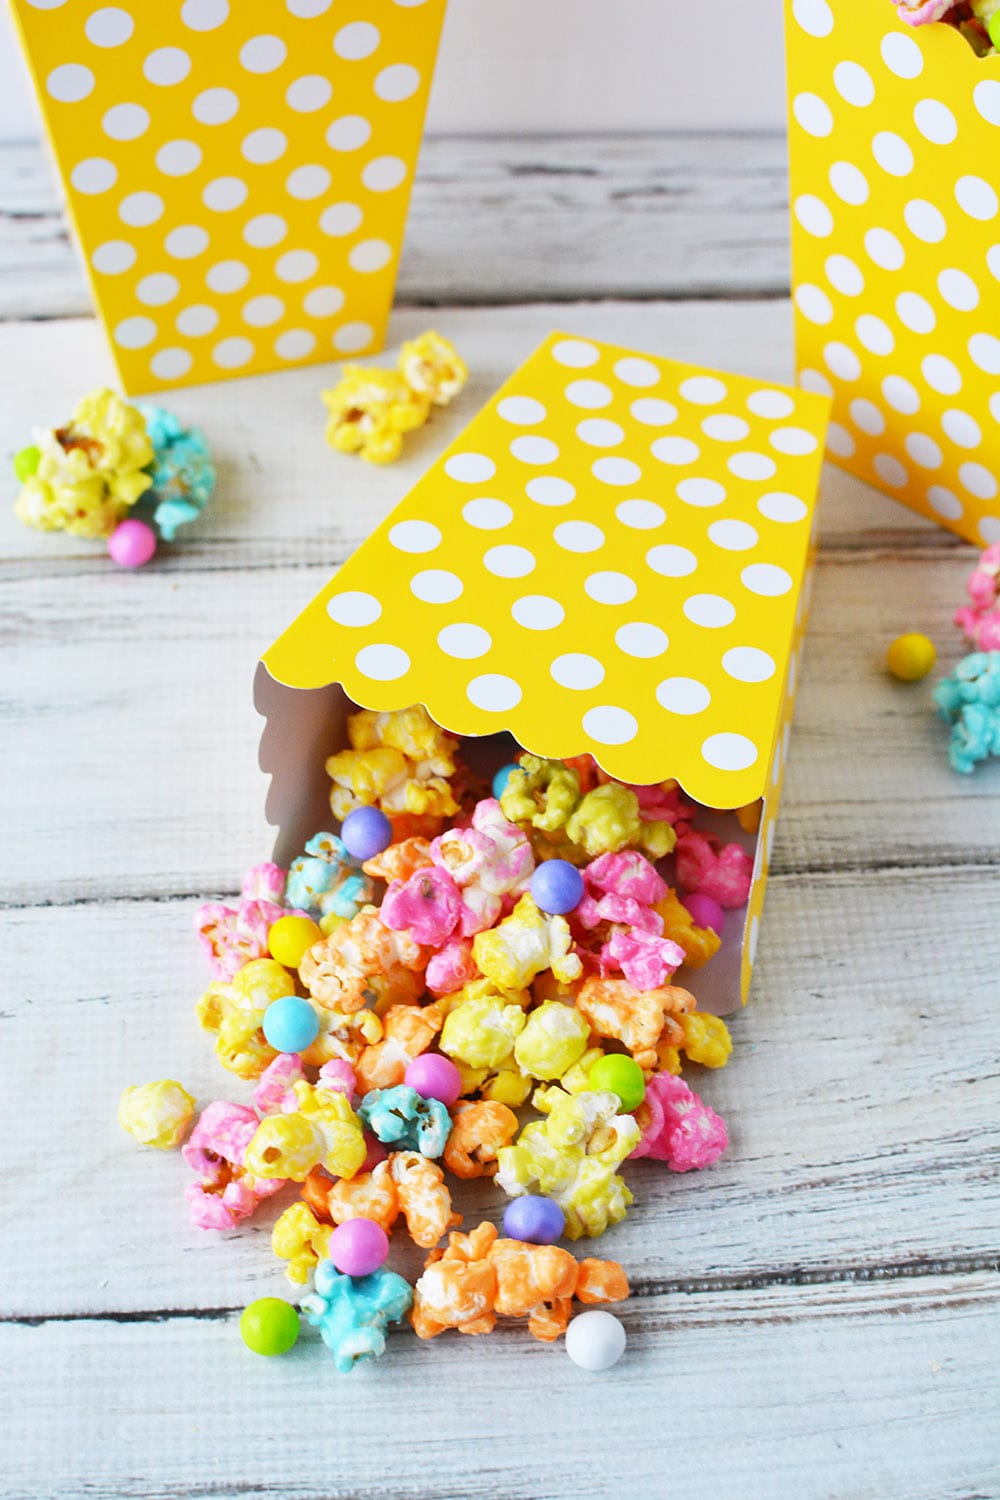 Rainbow popcorn mix in a yellow boxes